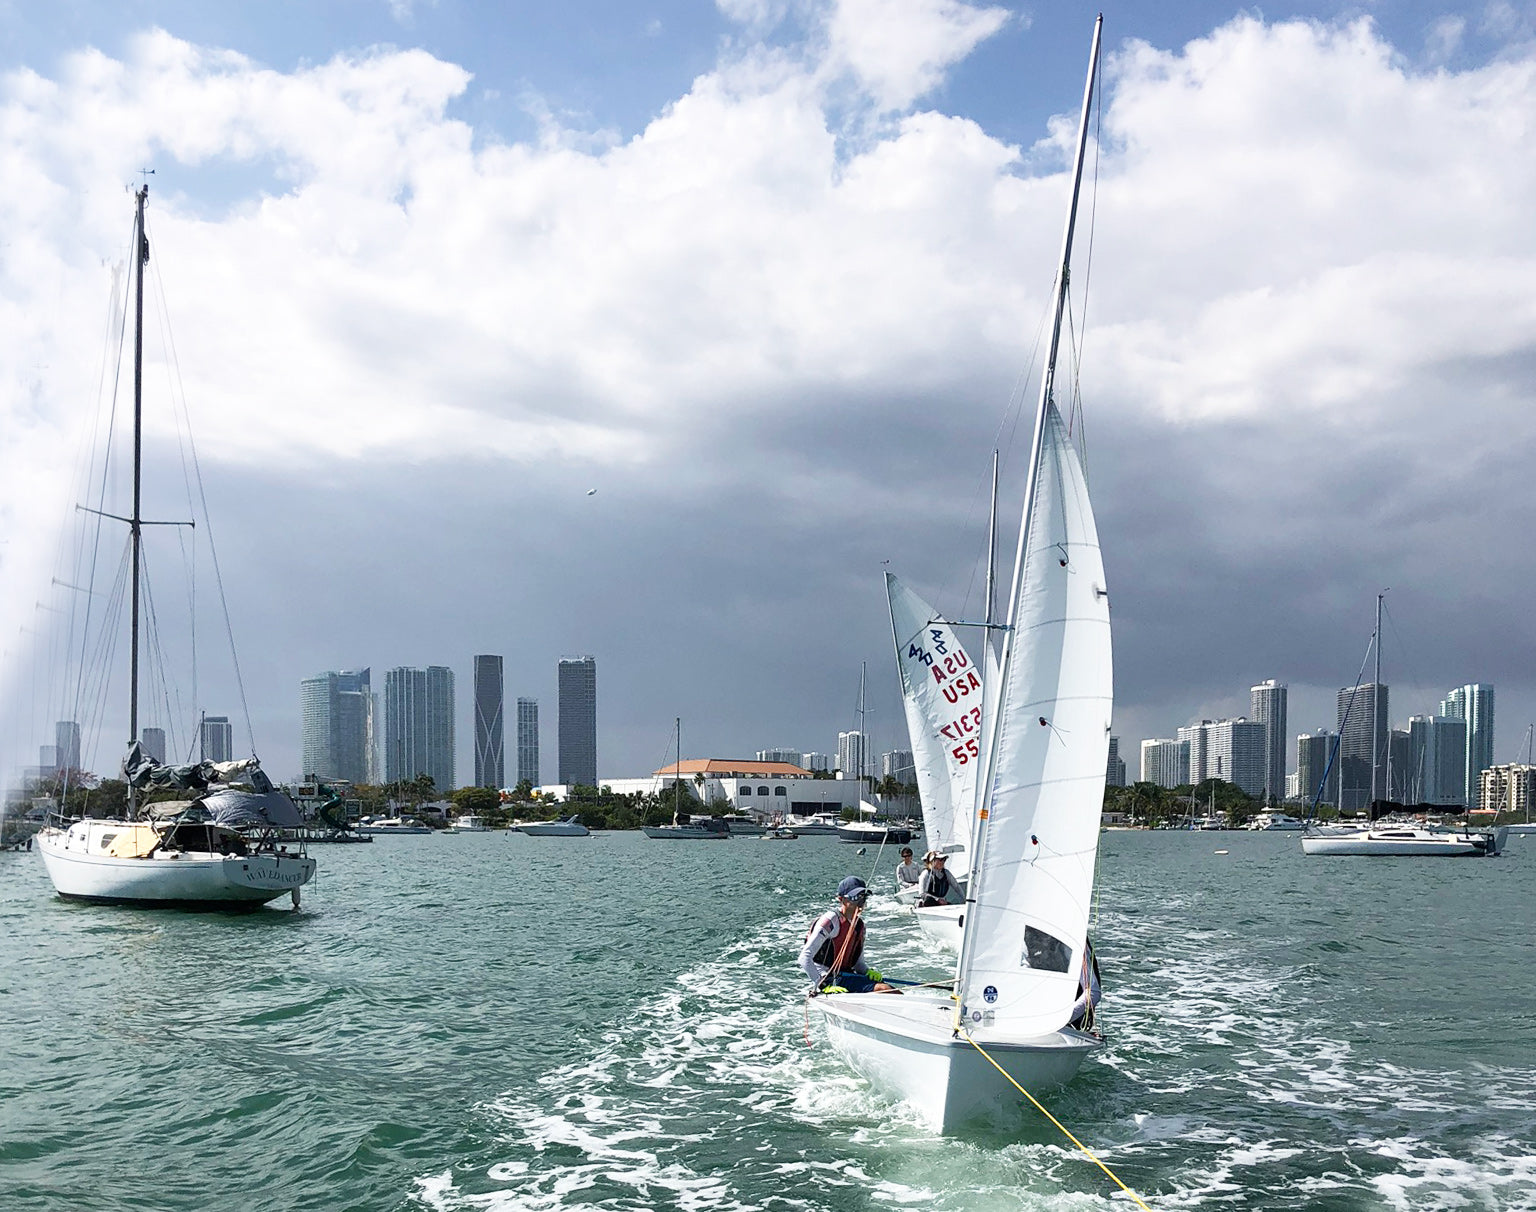 Haul to the open-water sailing east of Key Biscayne